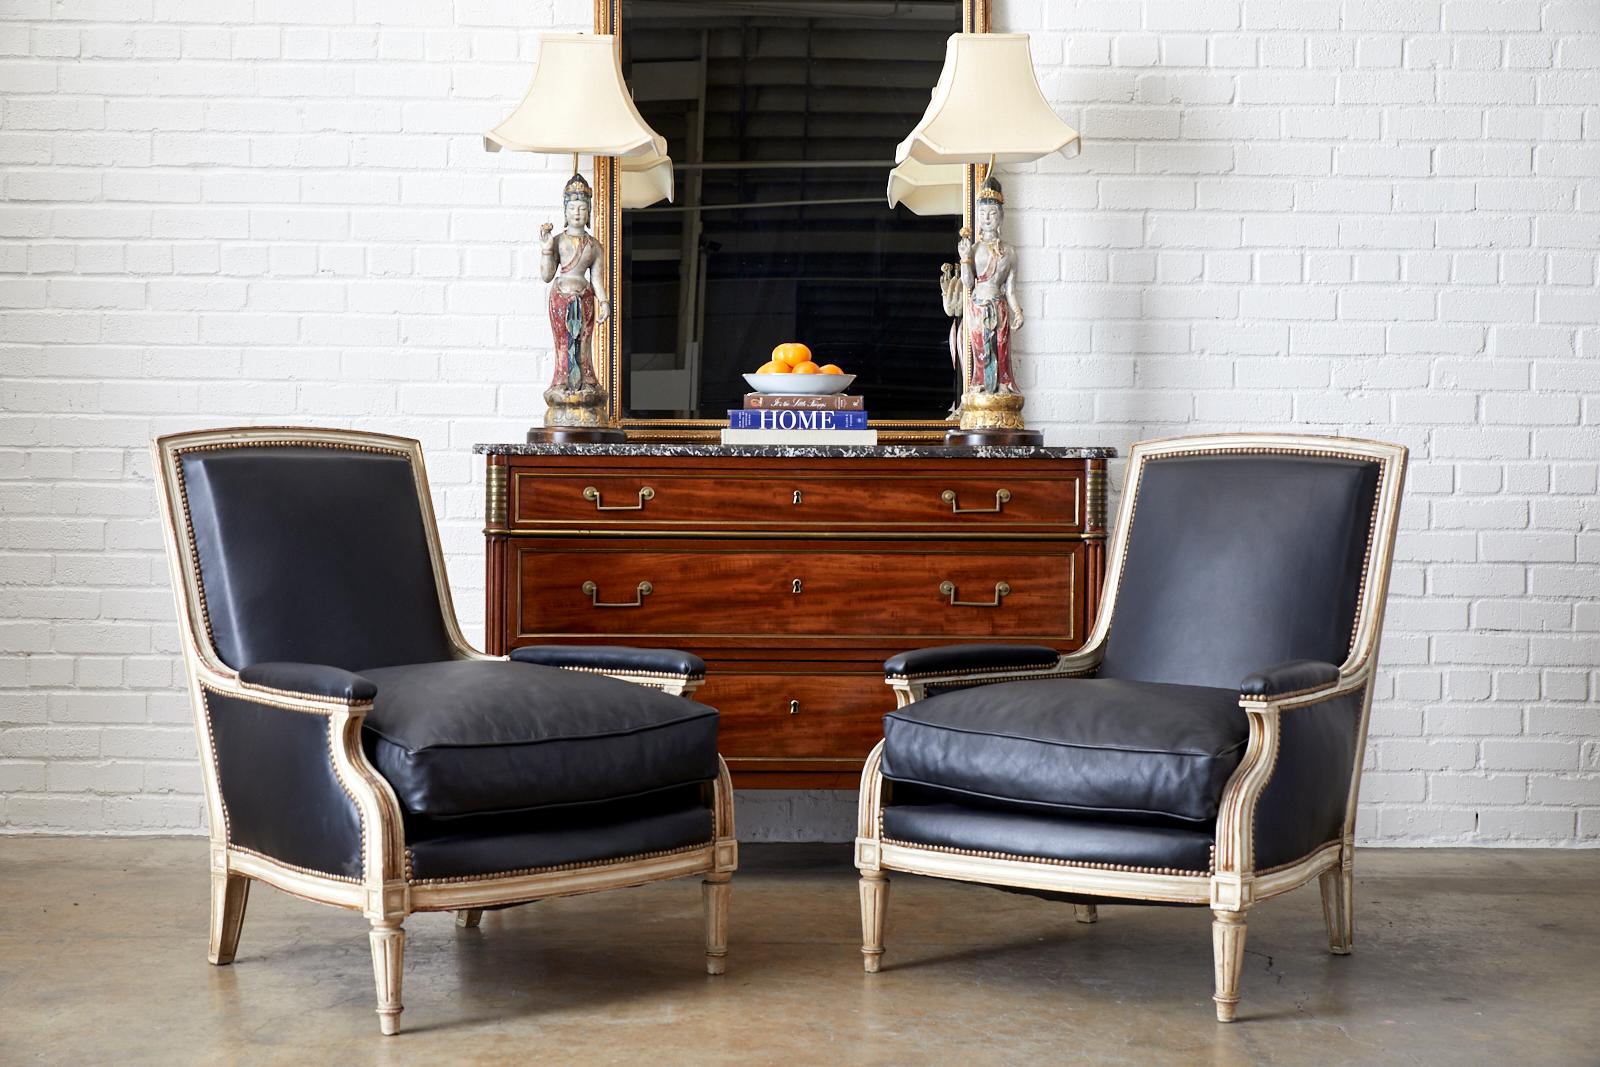 Fantastic pair of French painted bergere armchairs made by Maison Jansen. The large chairs feature a parcel gilt aged lacquer frame with a square flat back. Lavishly upholstered with thick, supple black leather hides having brass tack nailhead trim